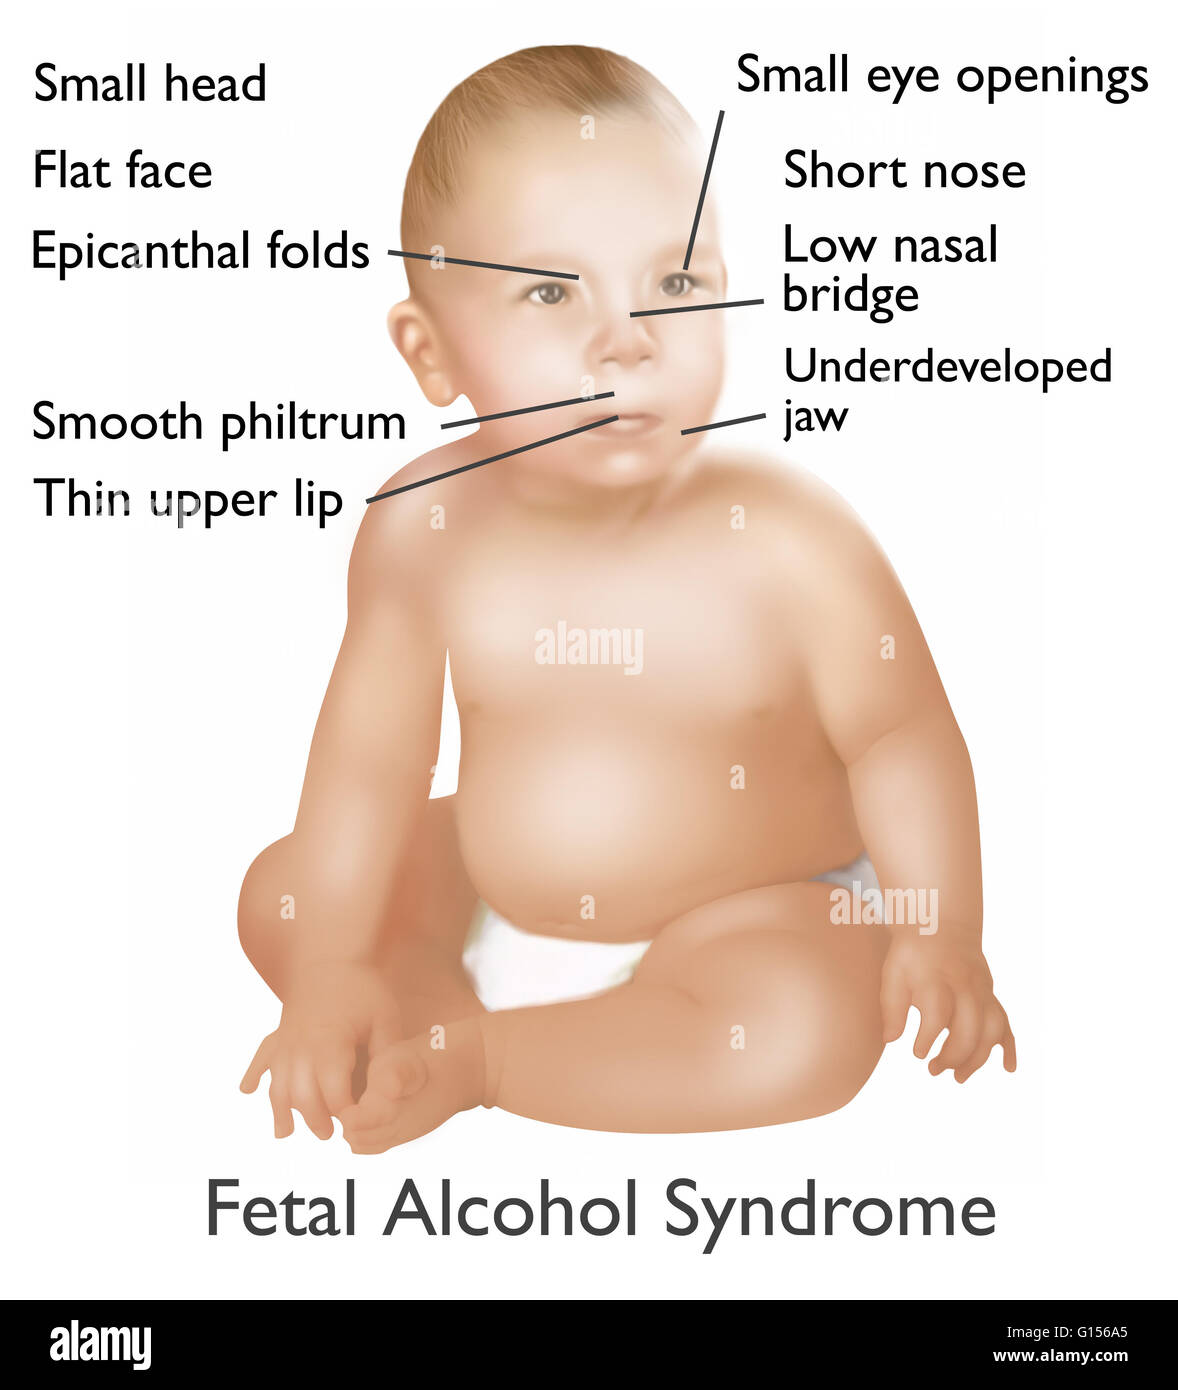 Illustration of baby with Fetal Alcohol Syndrome. Fetal Alcohol Syndrome or (FAS) is a condition in infants that is caused by alcohol consumption by the mother during time of pregnancy. Mental and physical defects such as a small head, flat face, epicanth Stock Photo